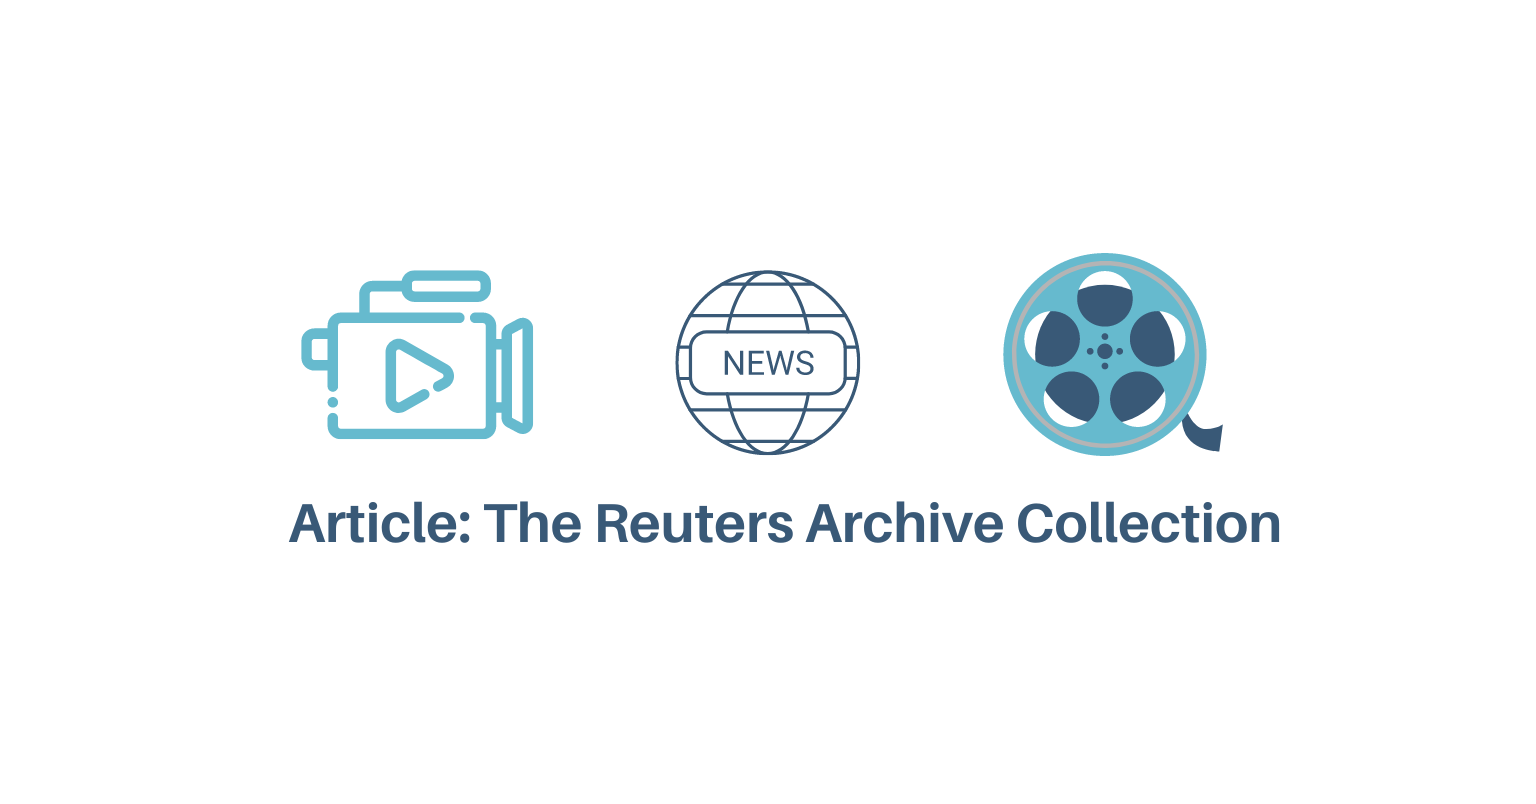 ARTICLE: THE REUTERS ARCHIVE COLLECTION